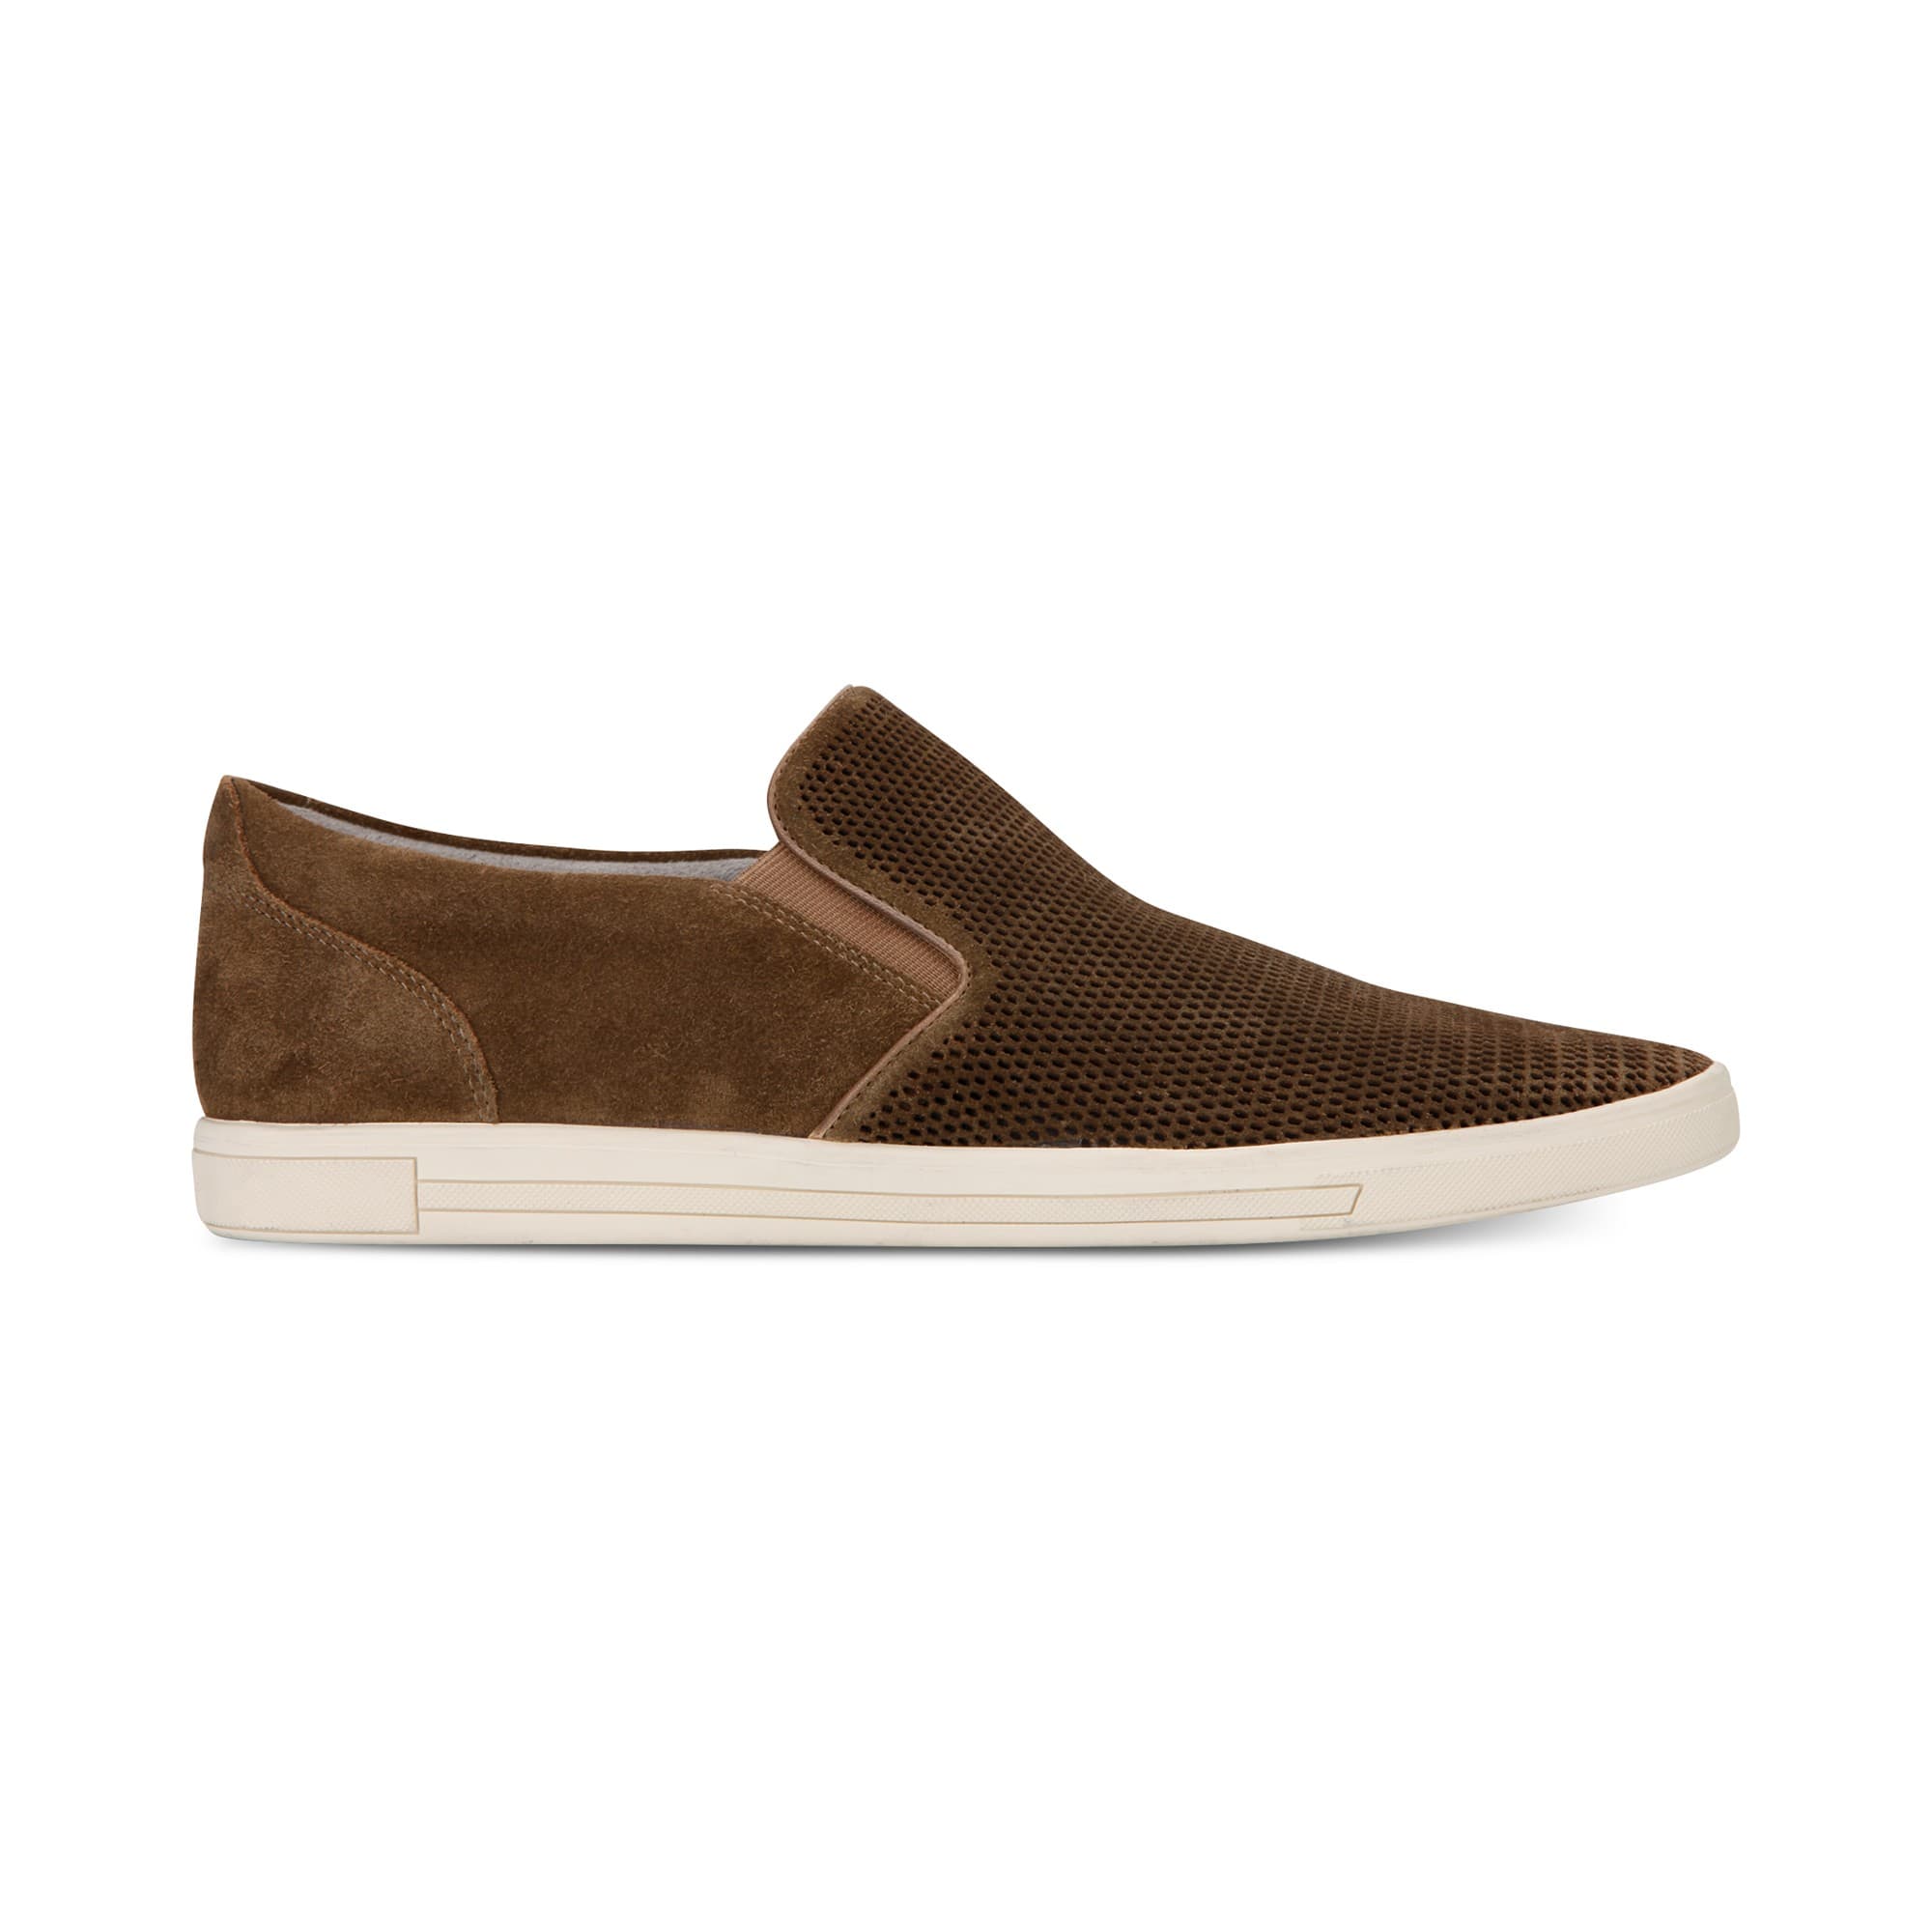 woocommerce-673321-2209615.cloudwaysapps.com-kenneth-cole-new-york-mens-brown-suede-initial-slip-on-sneakers